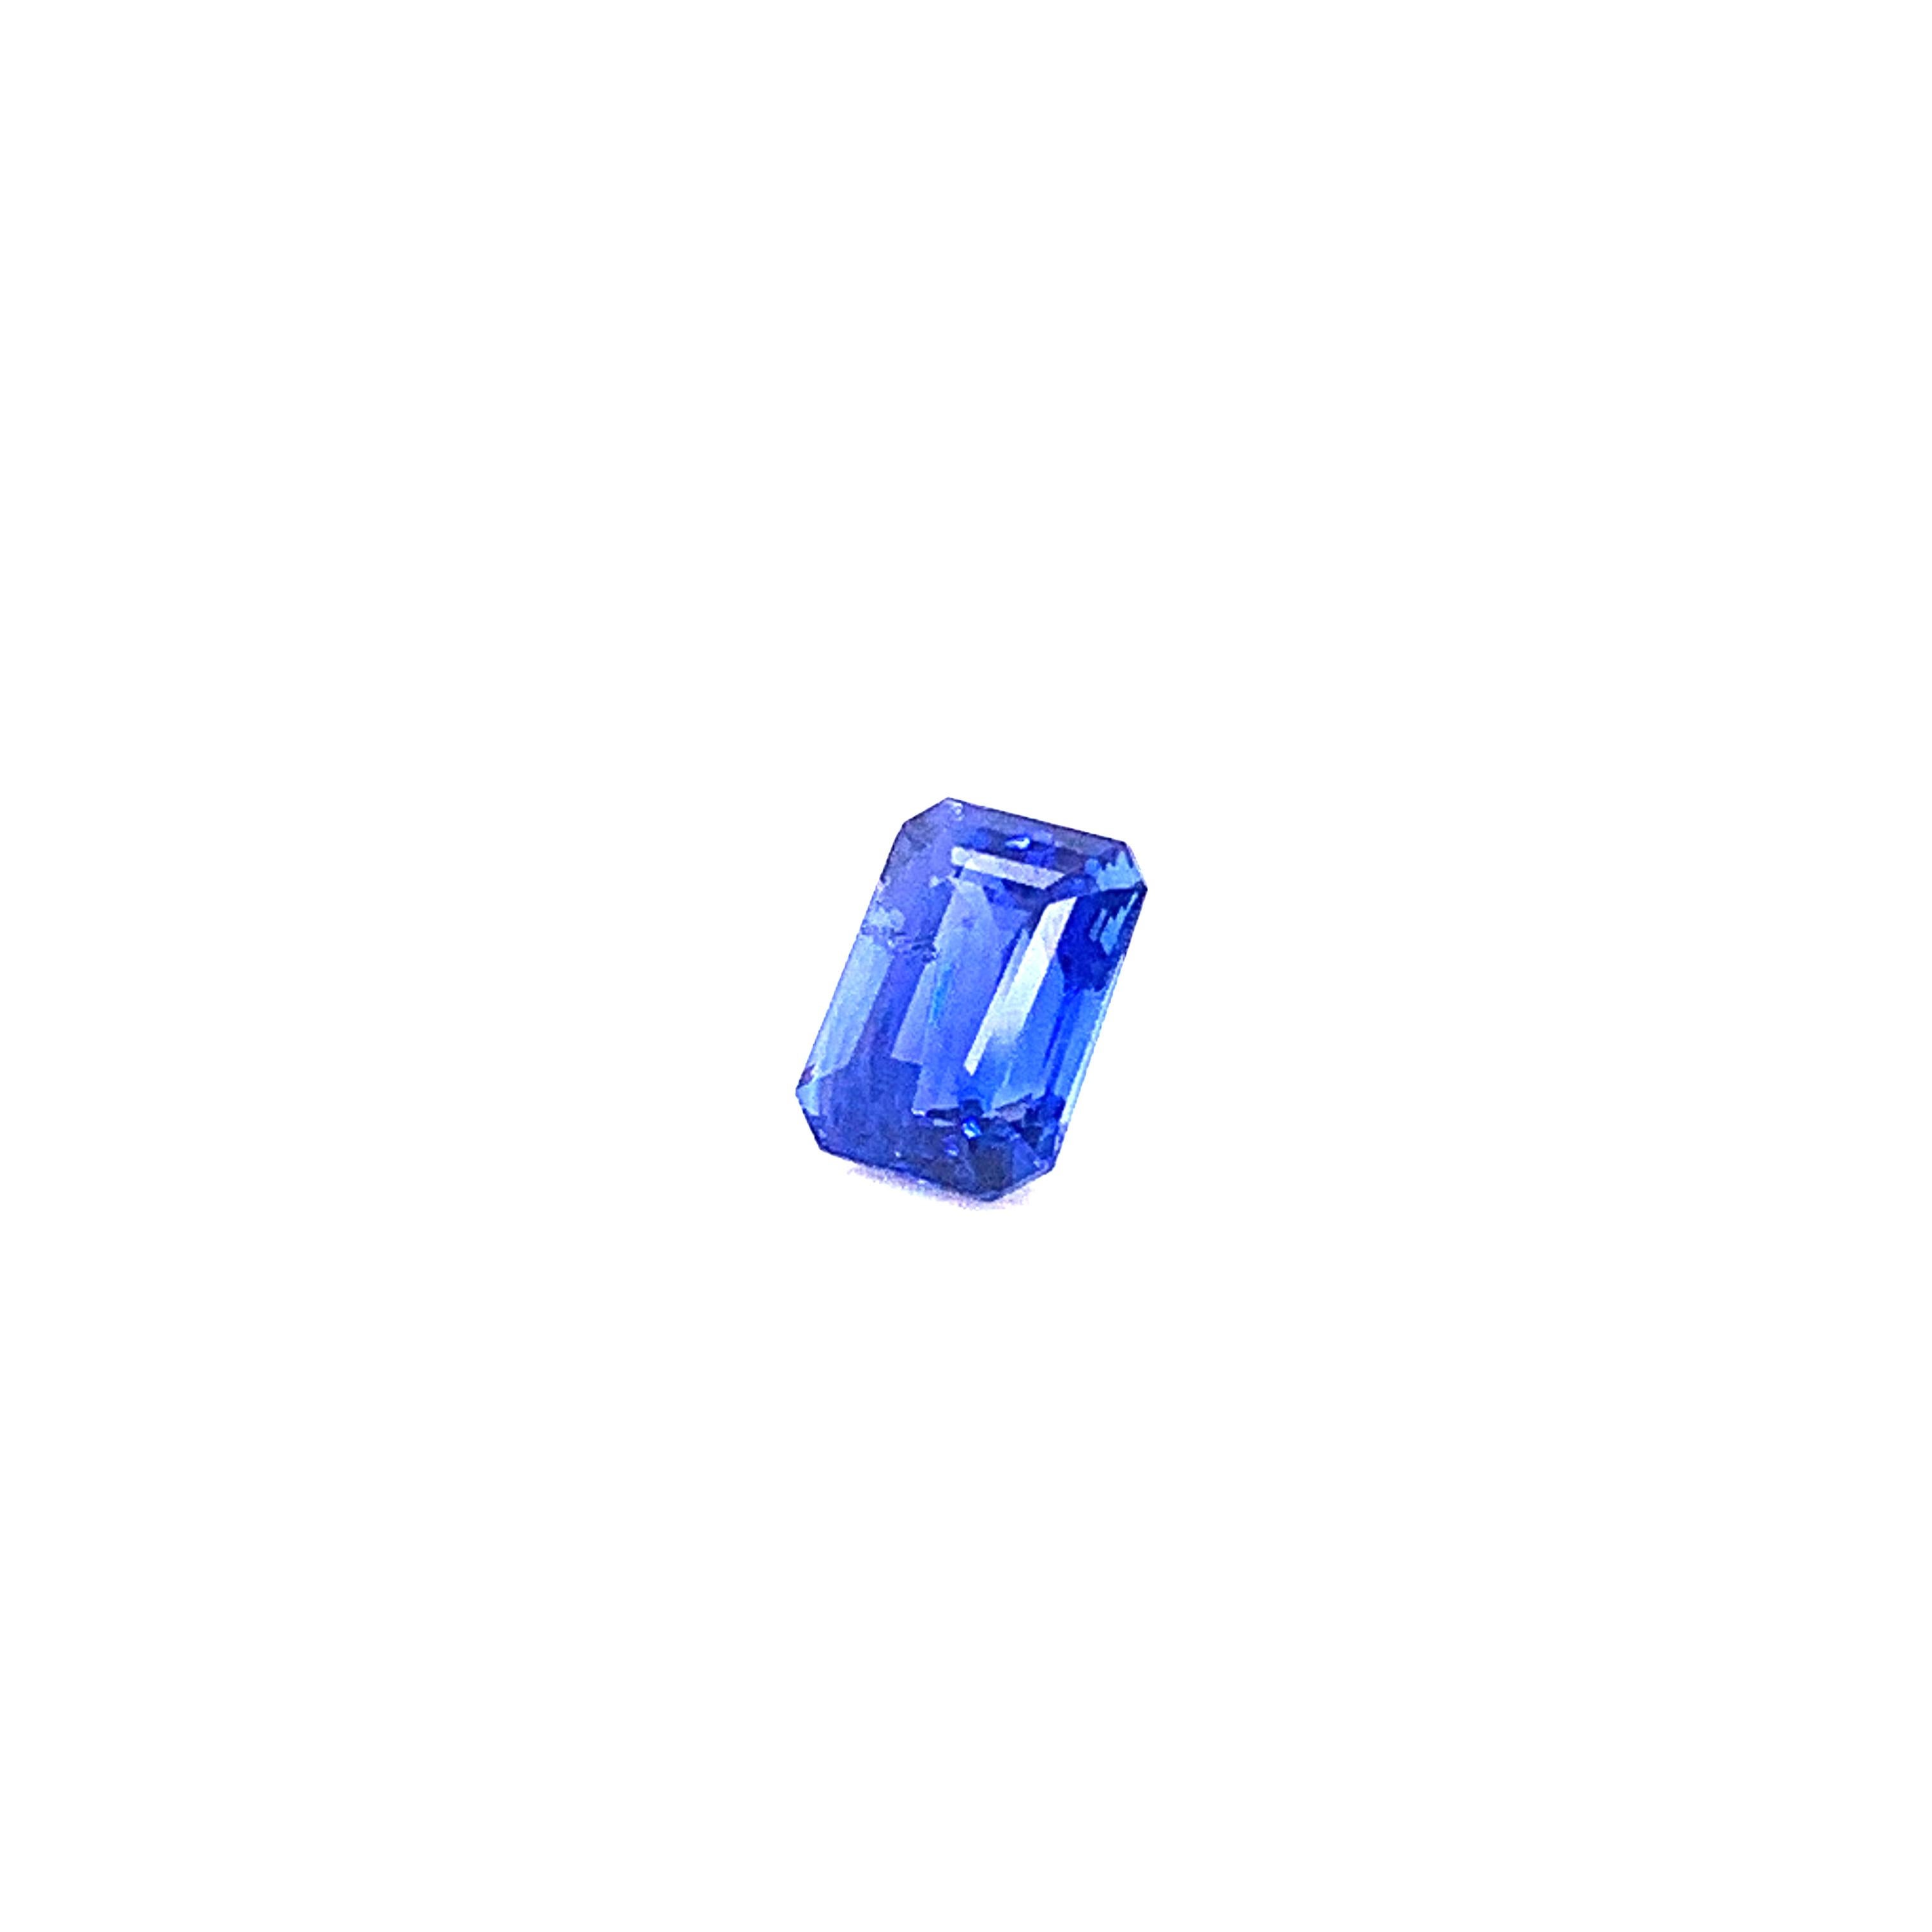 2.30 Carat Octagon-Cut Vivid Royal Blue Sapphire:

A beautiful gem, it is a natural octagon-cut vivid royal blue sapphire weighing 2.30 carat. Hailing from Sri Lanka, the sapphire is heated, and possesses a vivid blue colour saturation with superb